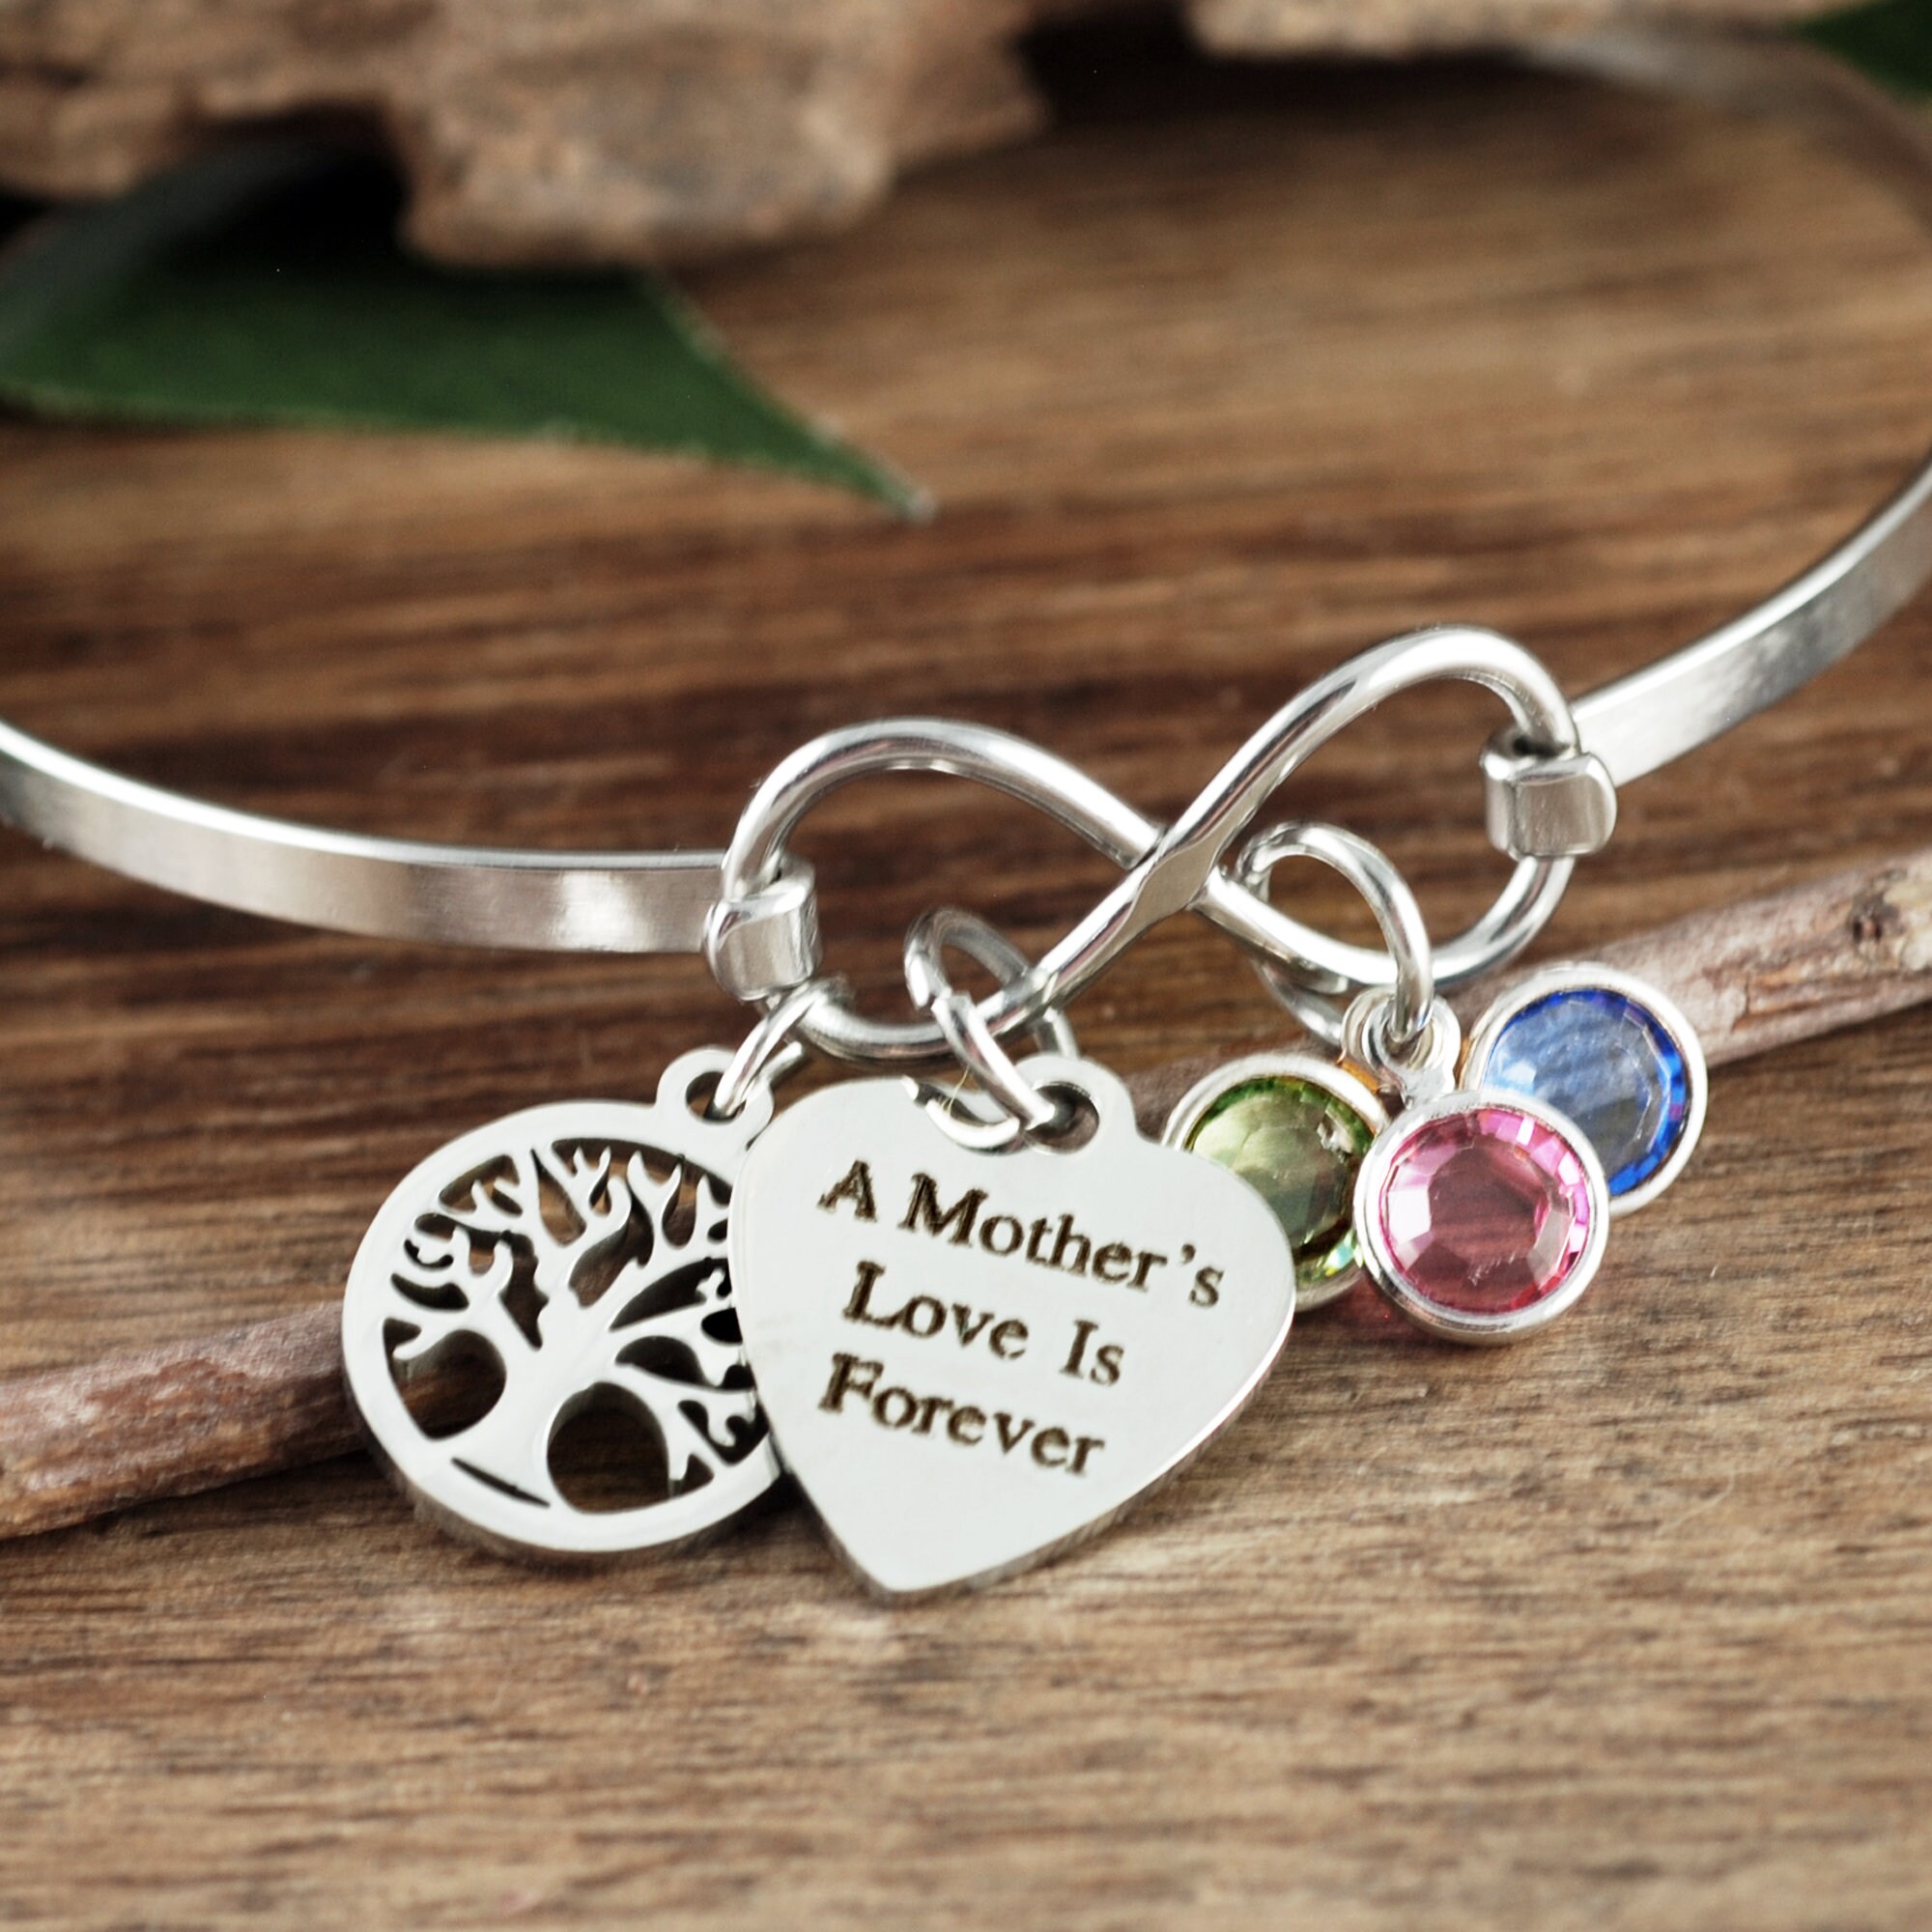 Personalized Family Tree Bracelet, A Mother's Love is Forever, Infinity